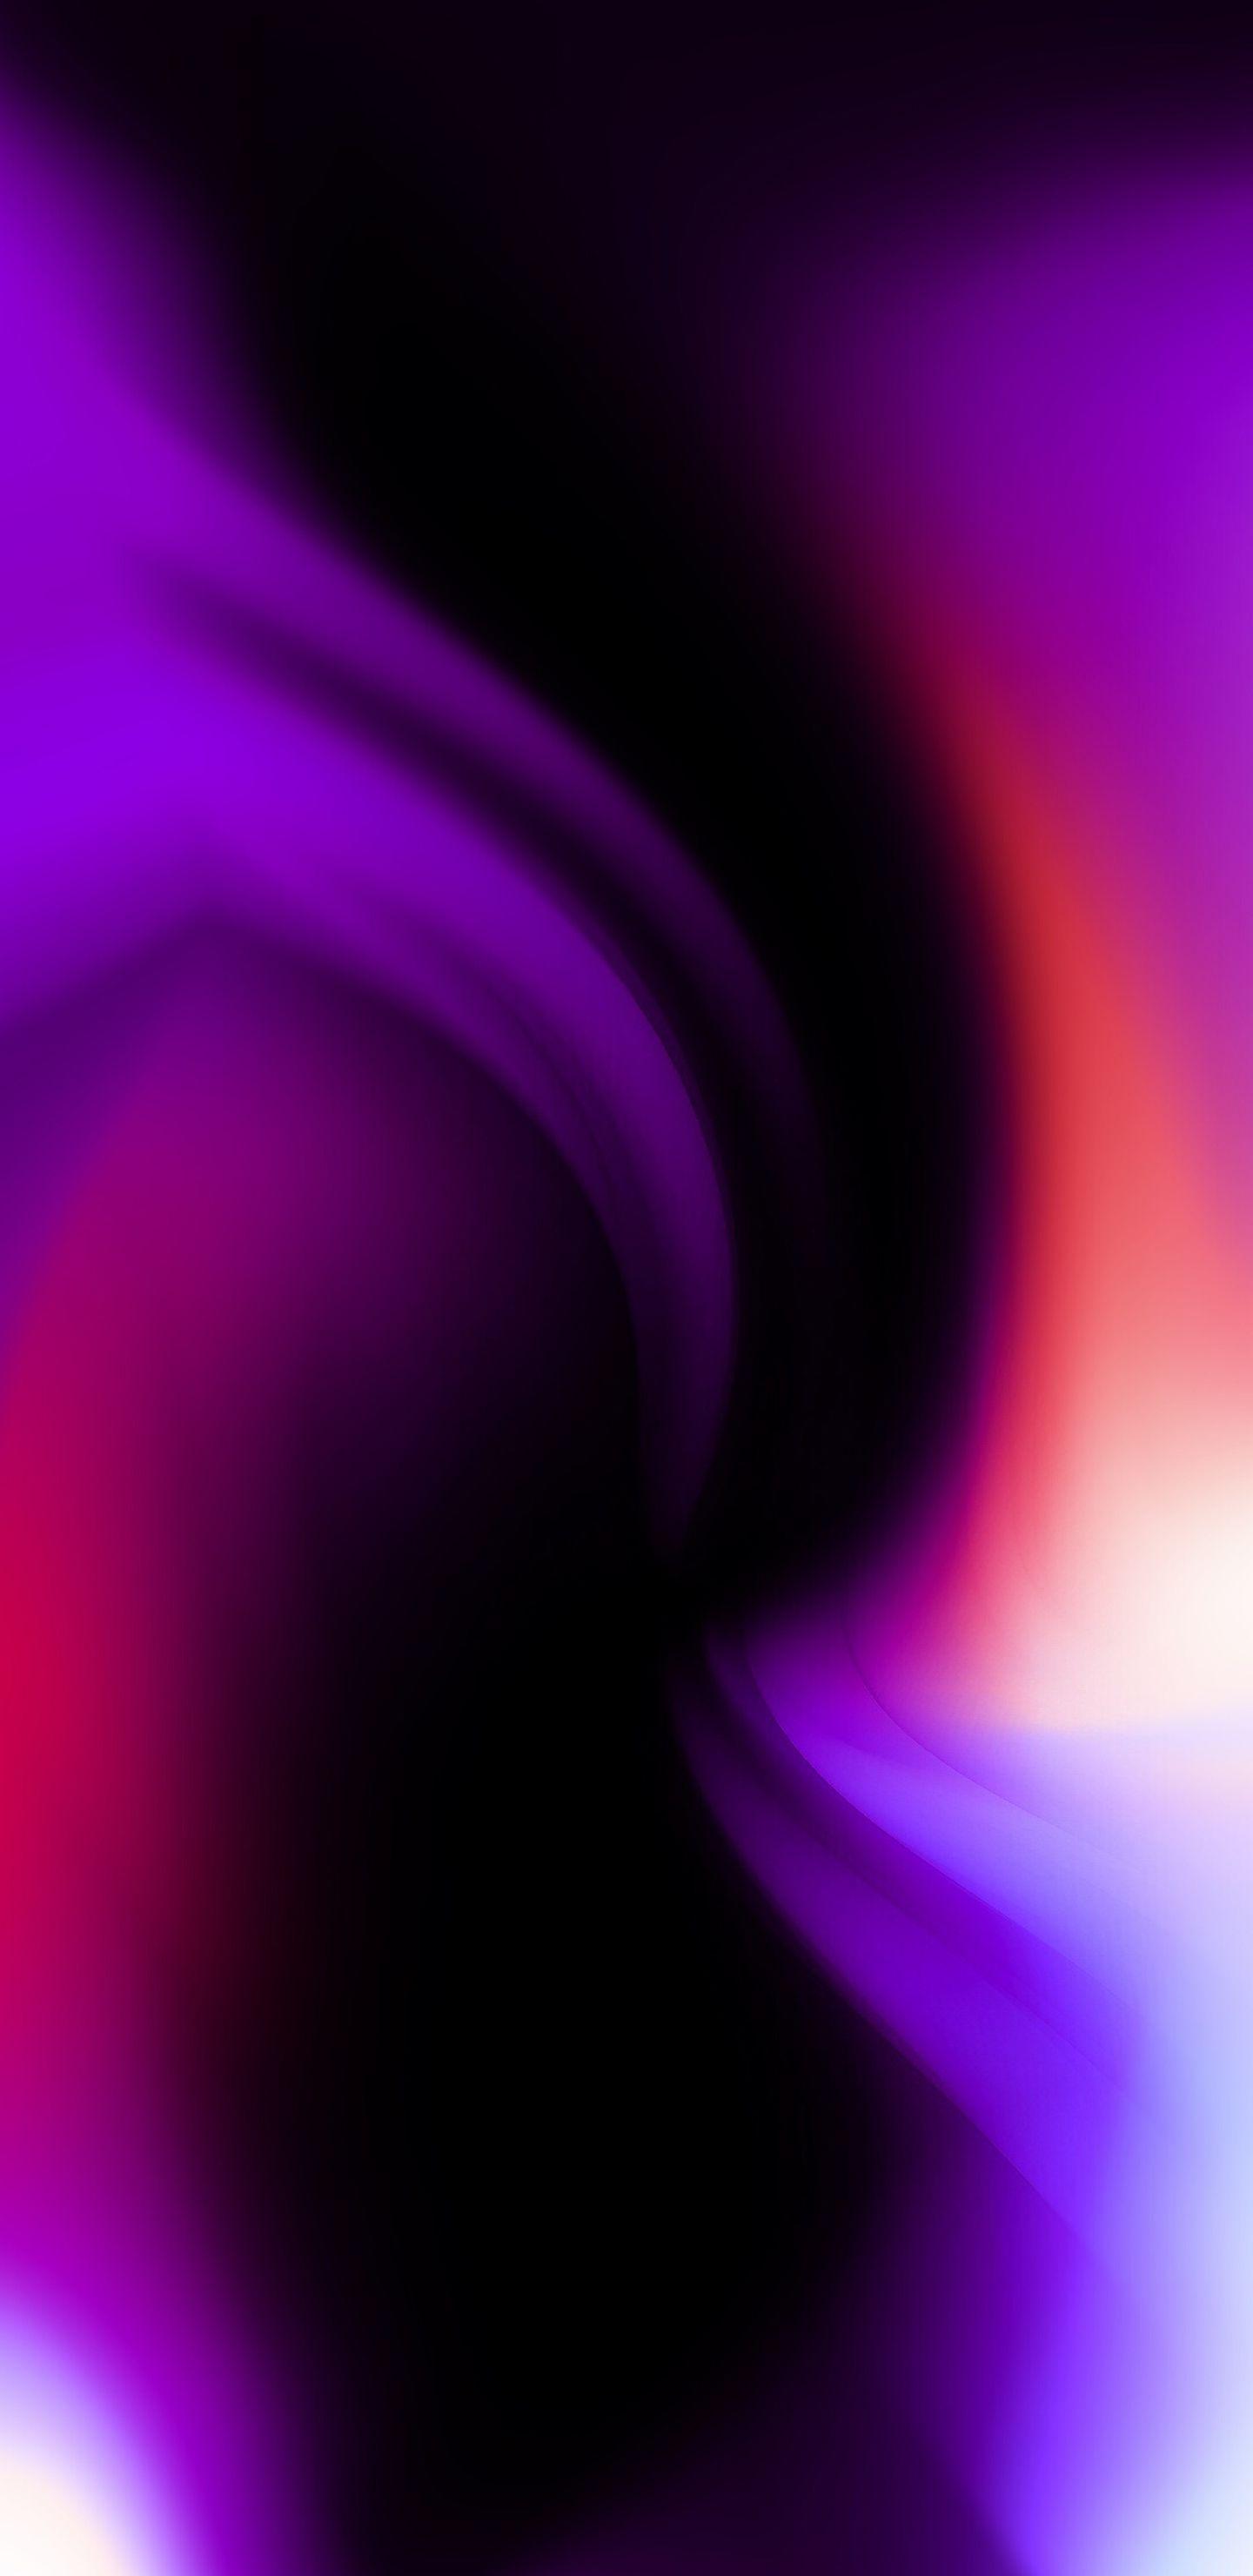 Samsung Galaxy S9 and SWallpaper with Abstract Purple Lights